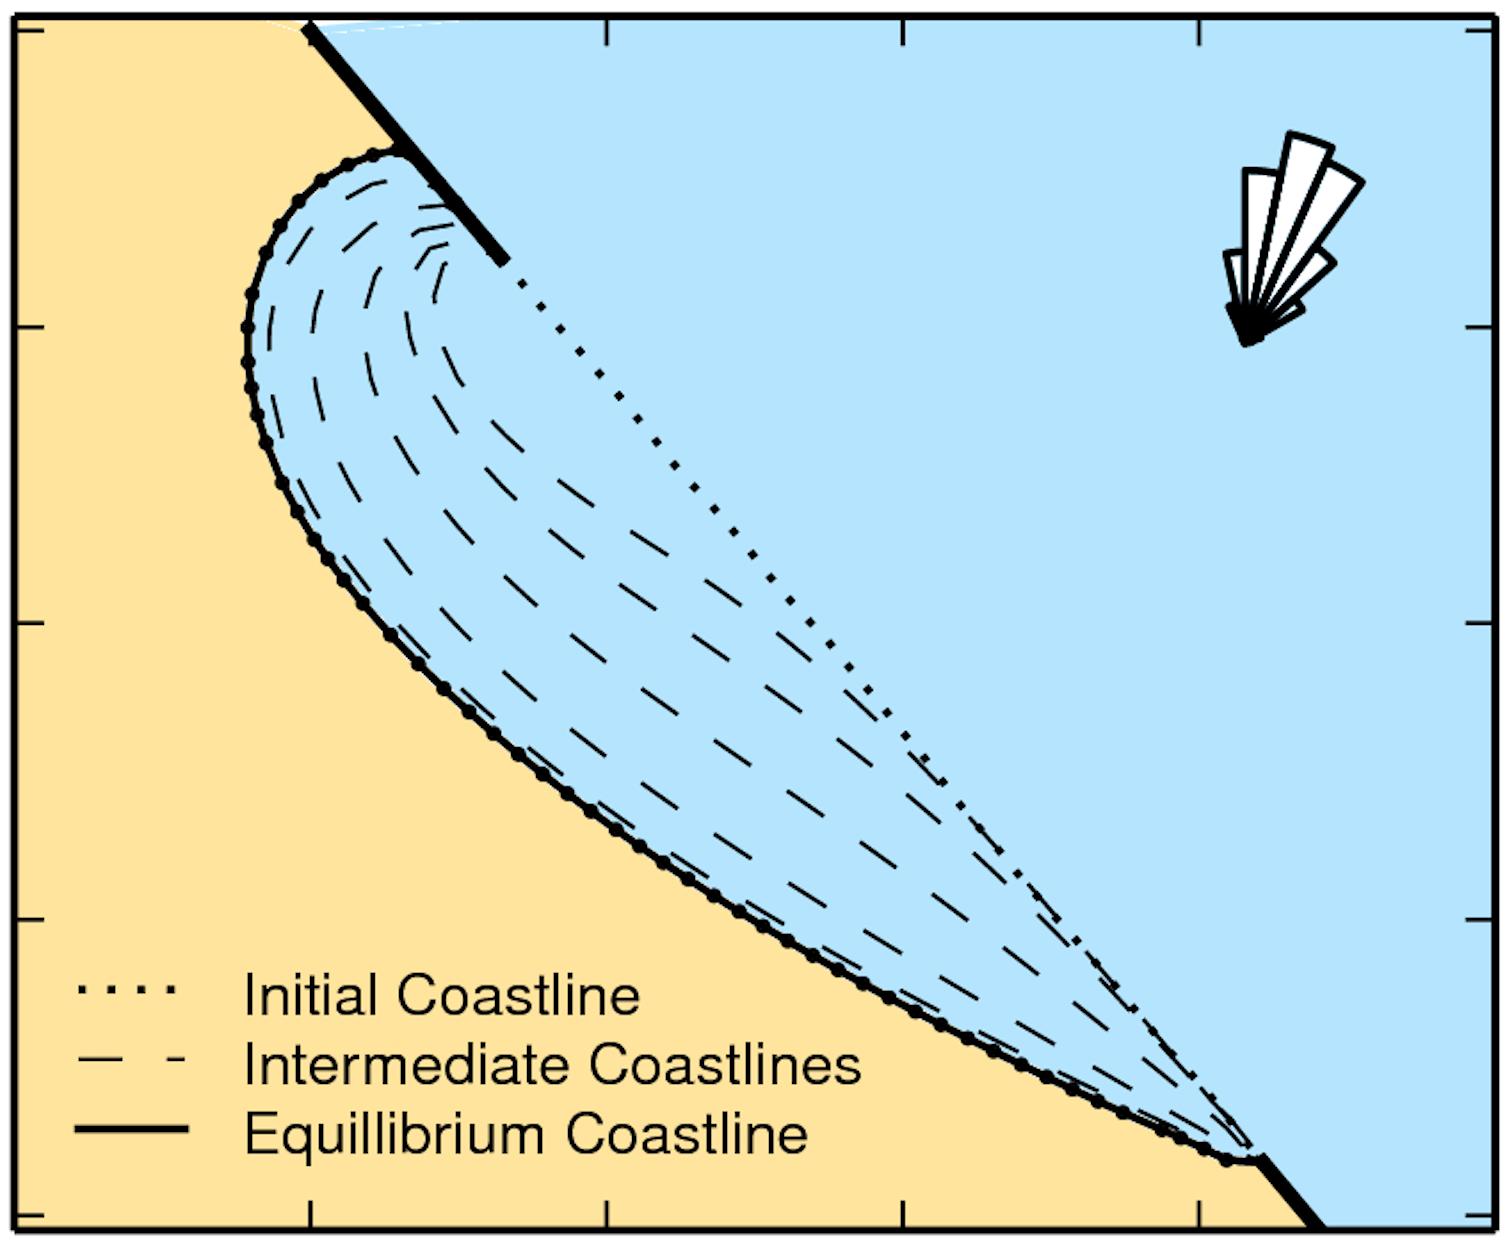 shallow-water depositional systems